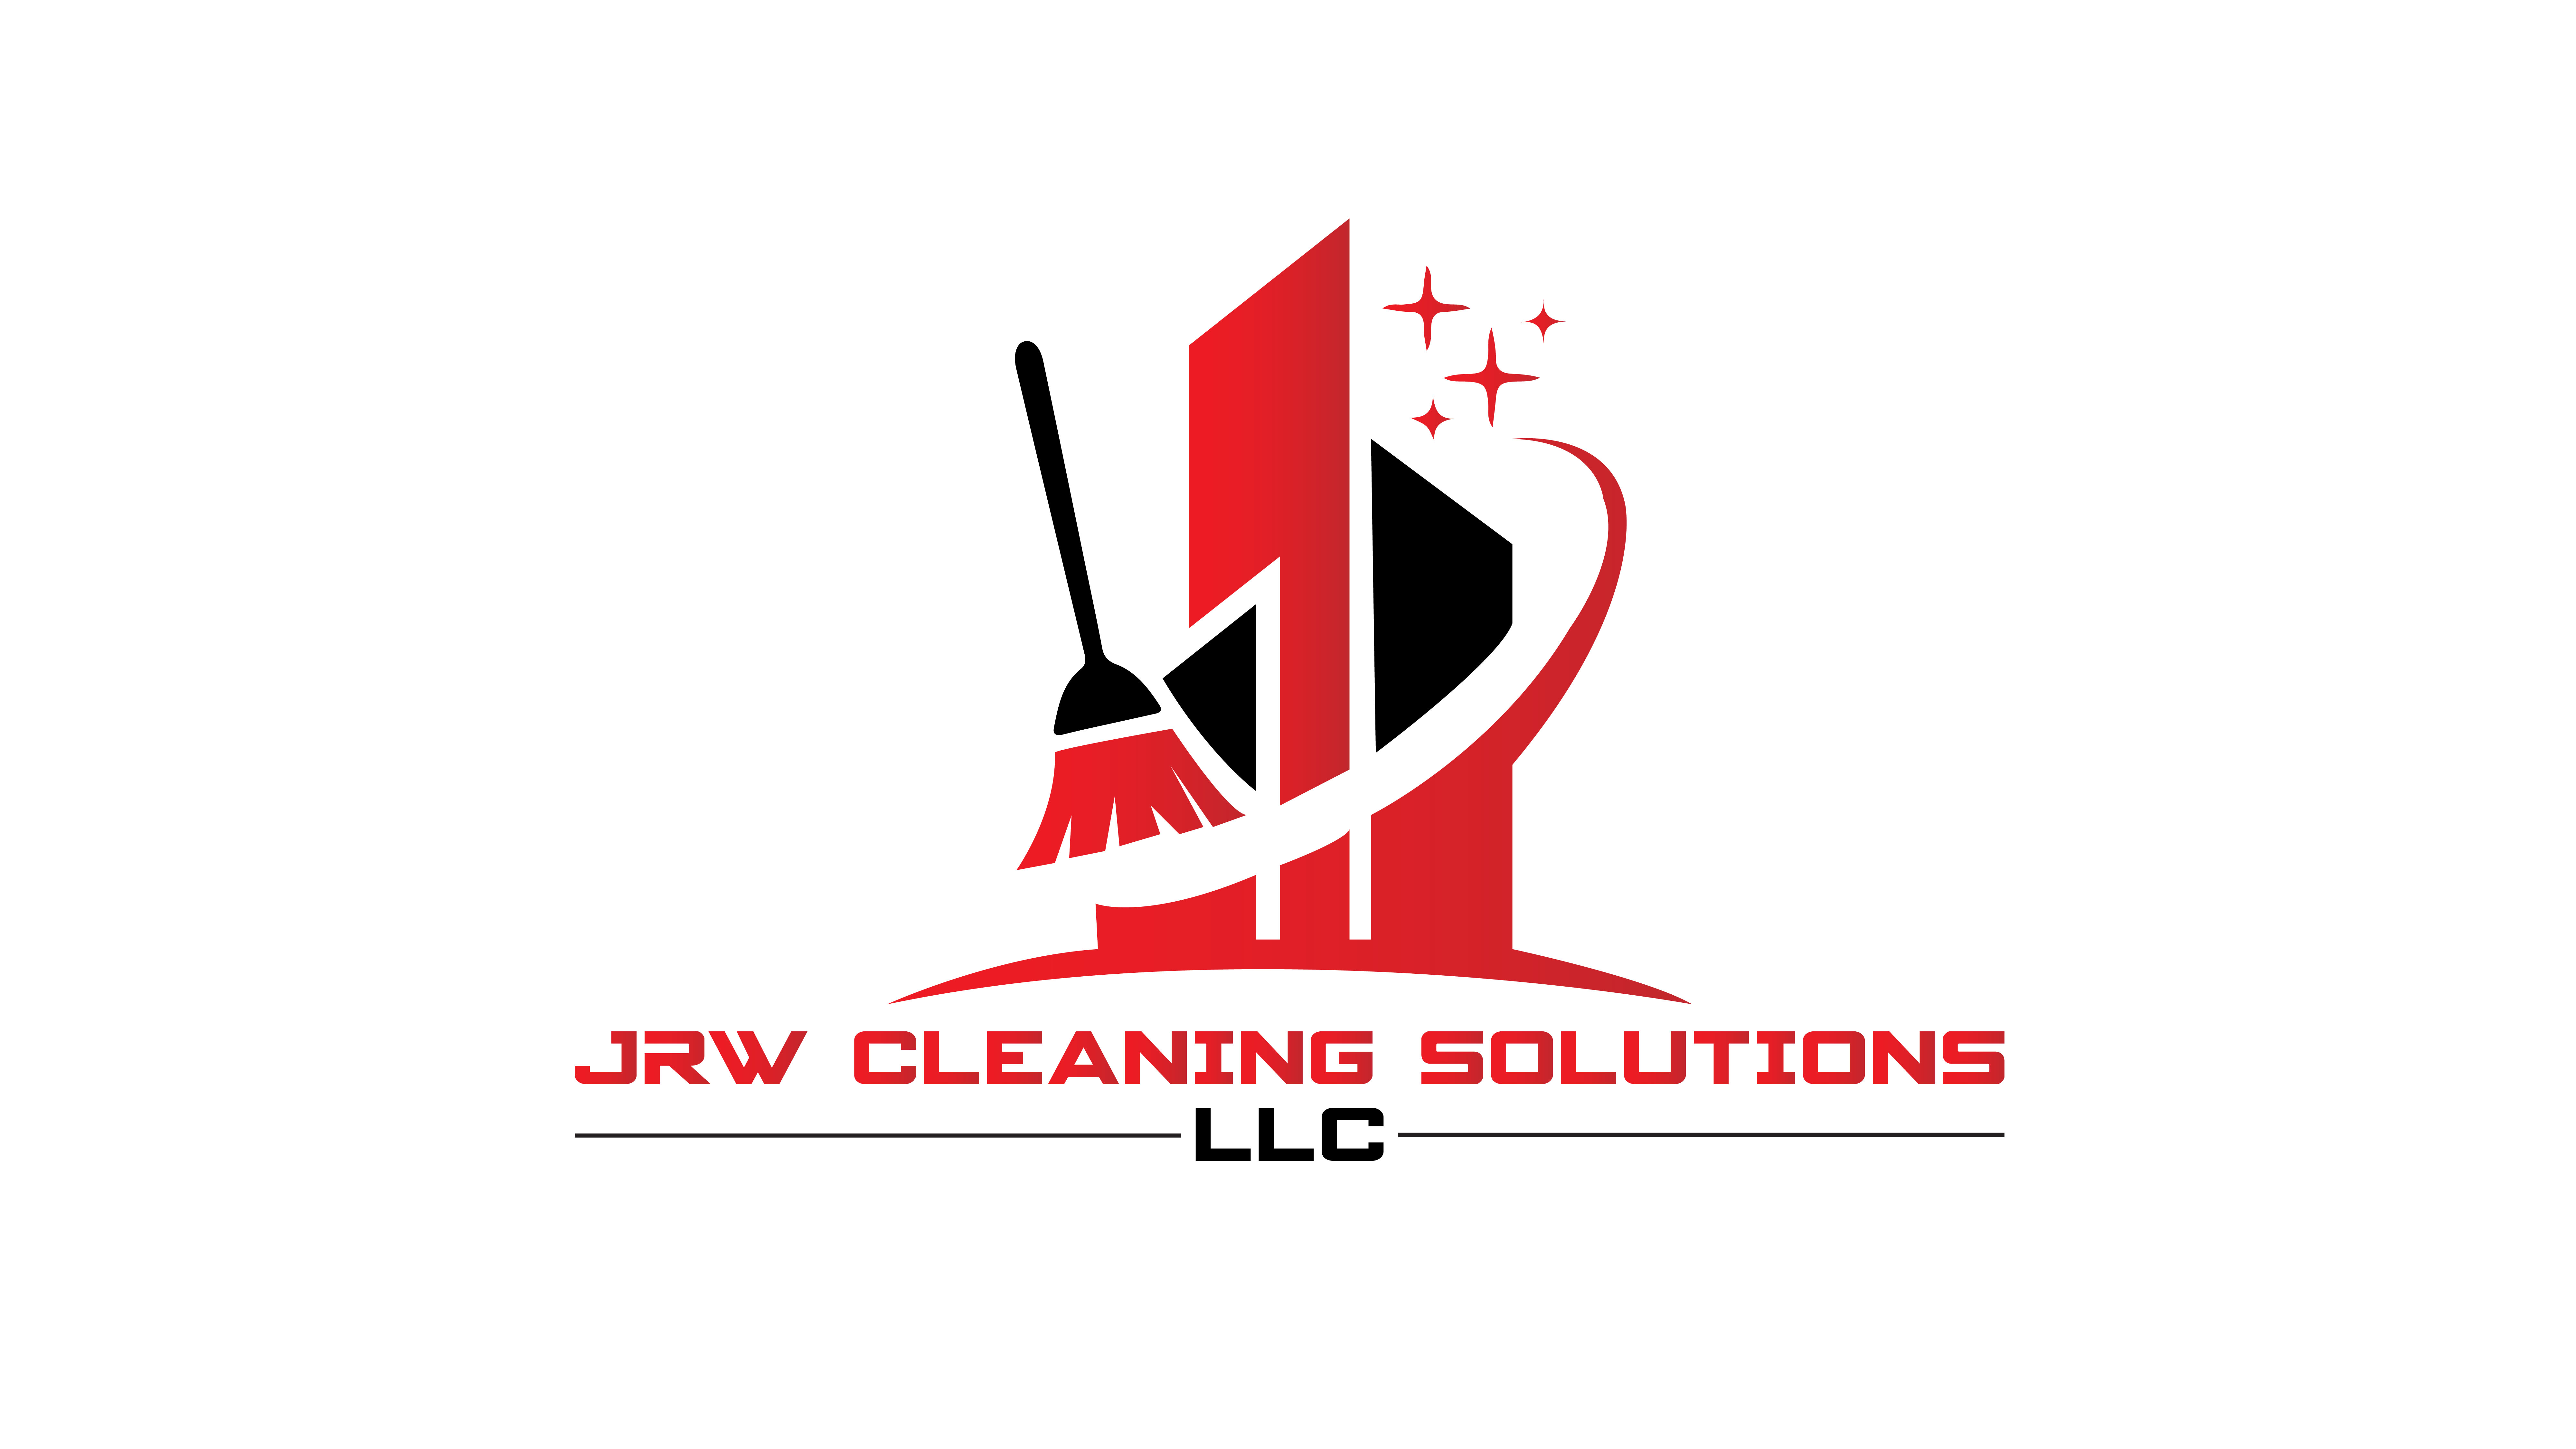 JRW Cleaning Solutions, LLC